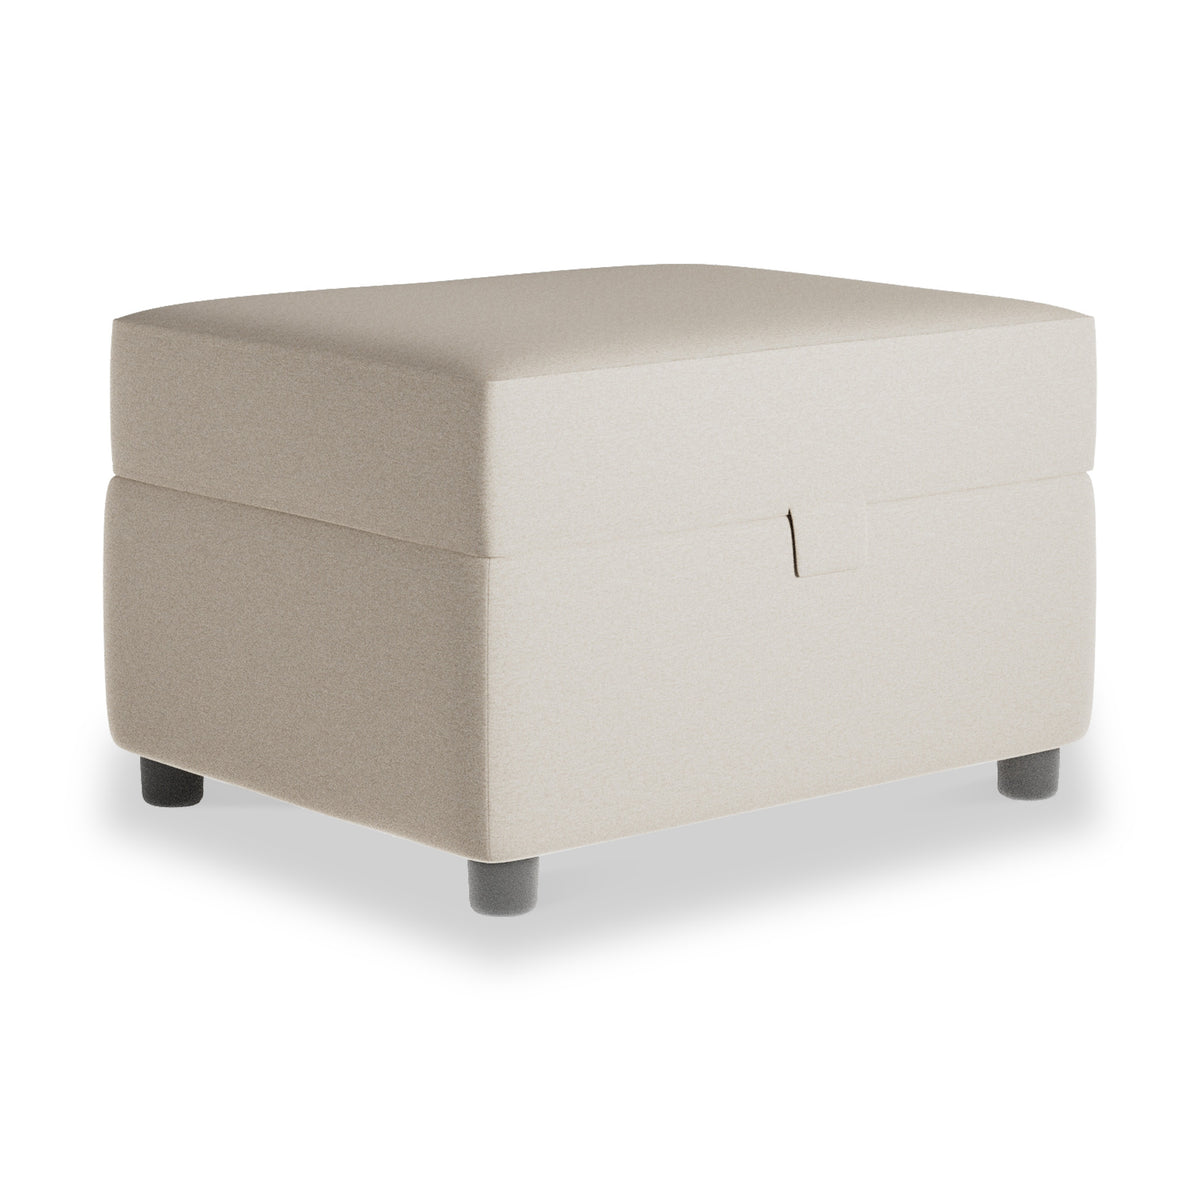 Thomas Sandstone Small Storage Footstool from Roseland Furniture